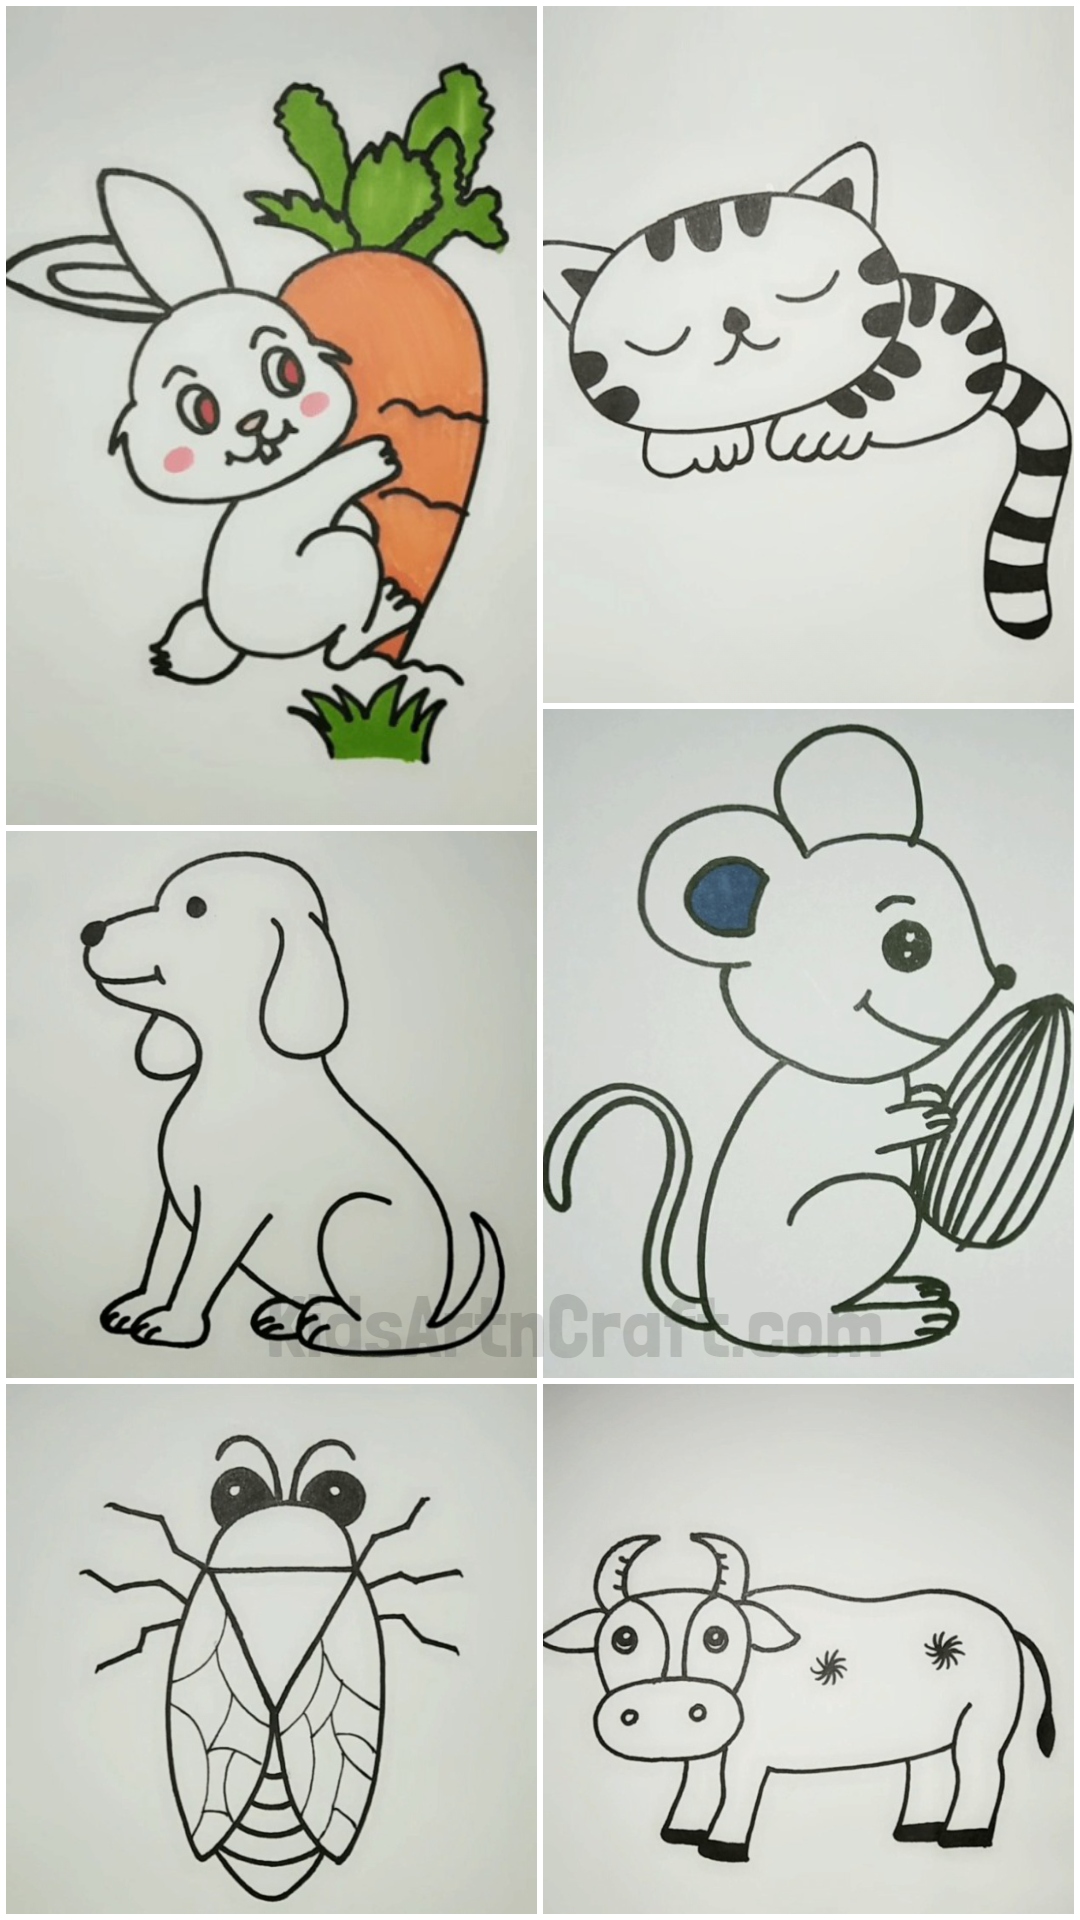 Animal Drawing Ideas For Kids - Let's Take A Tour Of The Animal World!